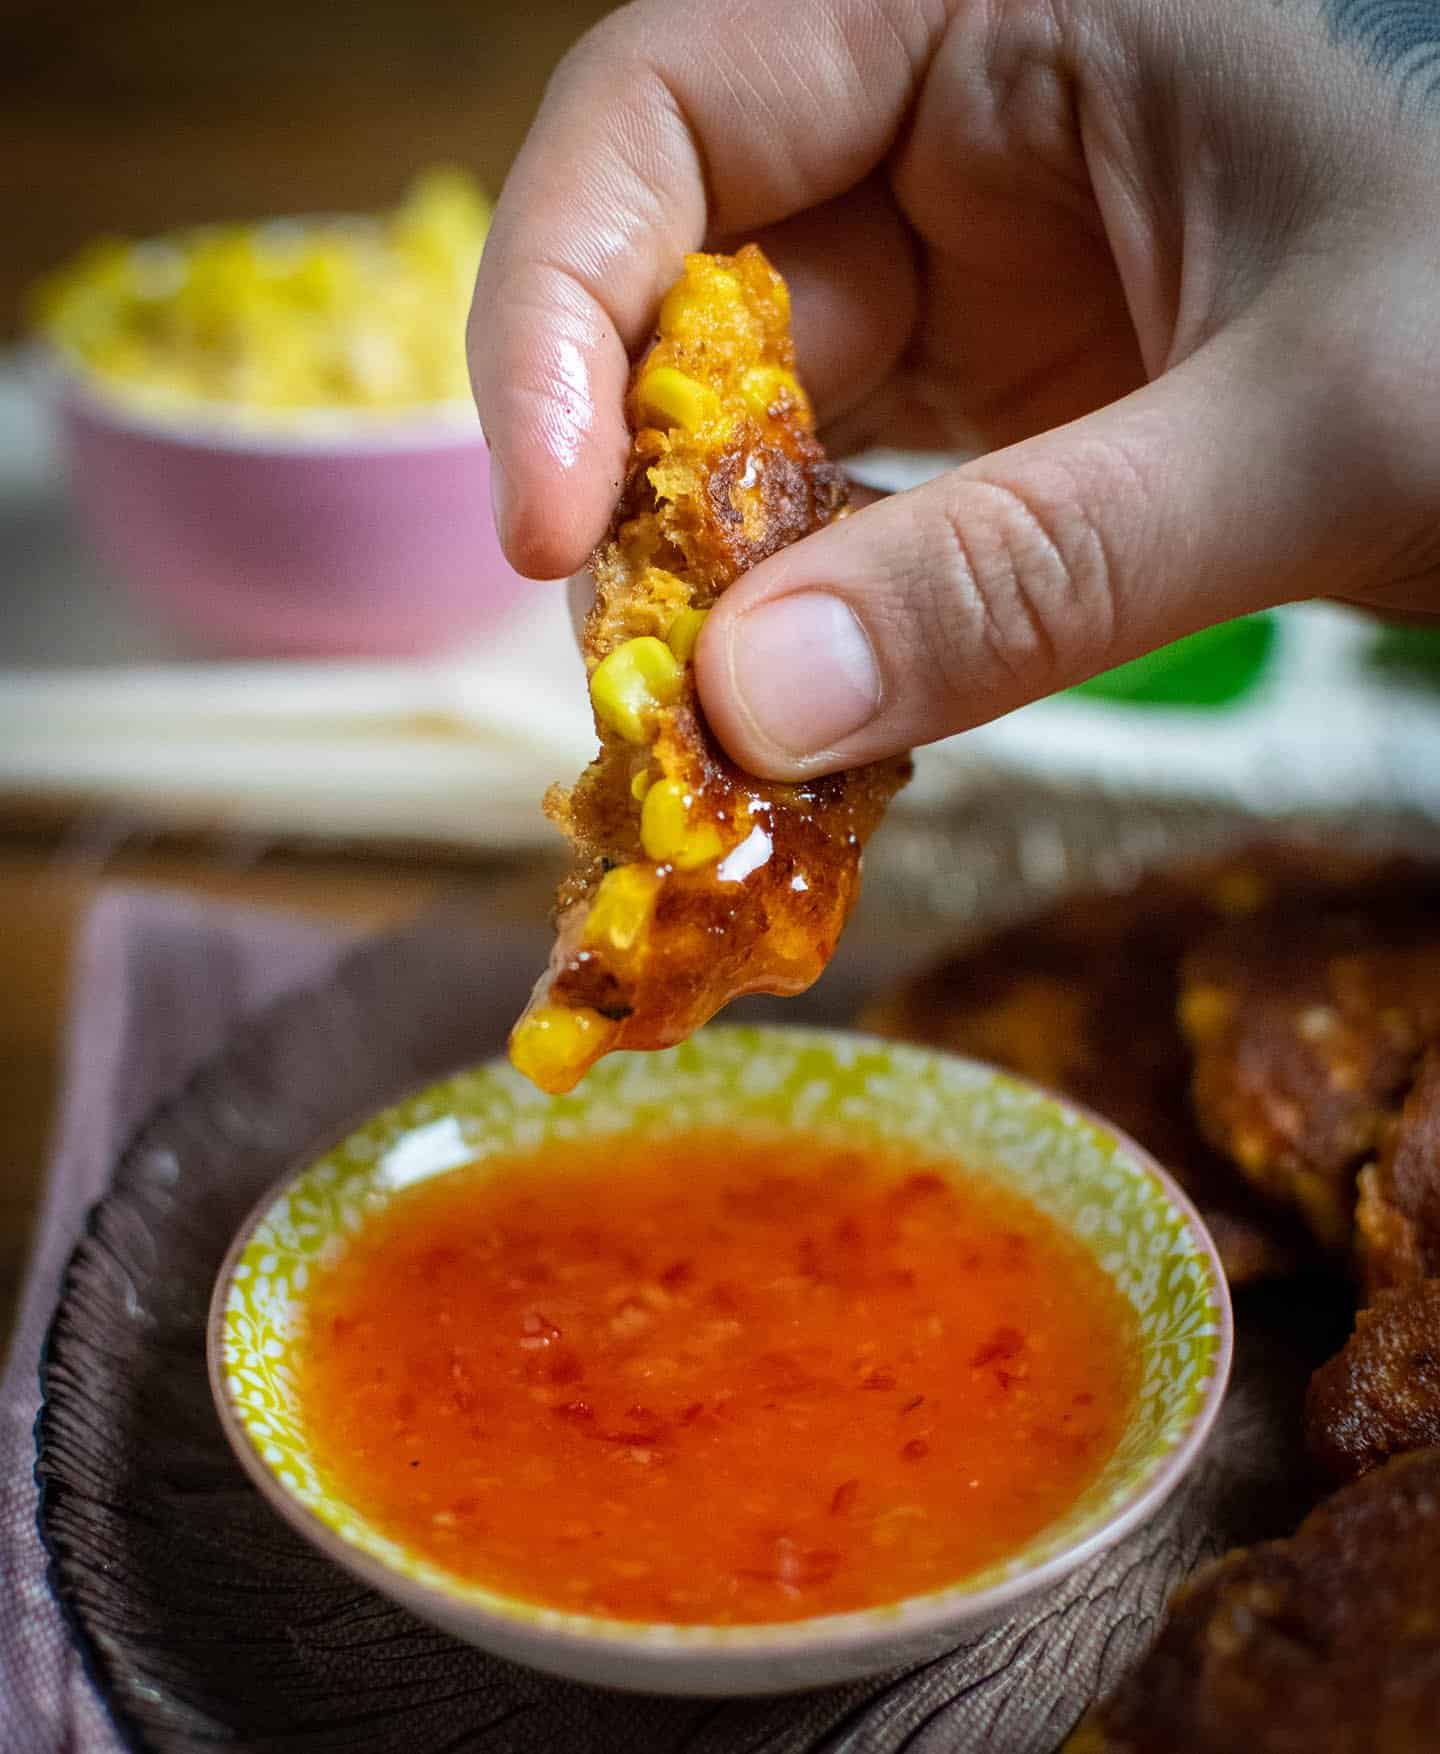 Dan's hand holding a piece of sweetcorn fritter after just dunking it in the pot of sweet chilli sauce beneath it. A pink pot full of sweetcorn is visible in the background.